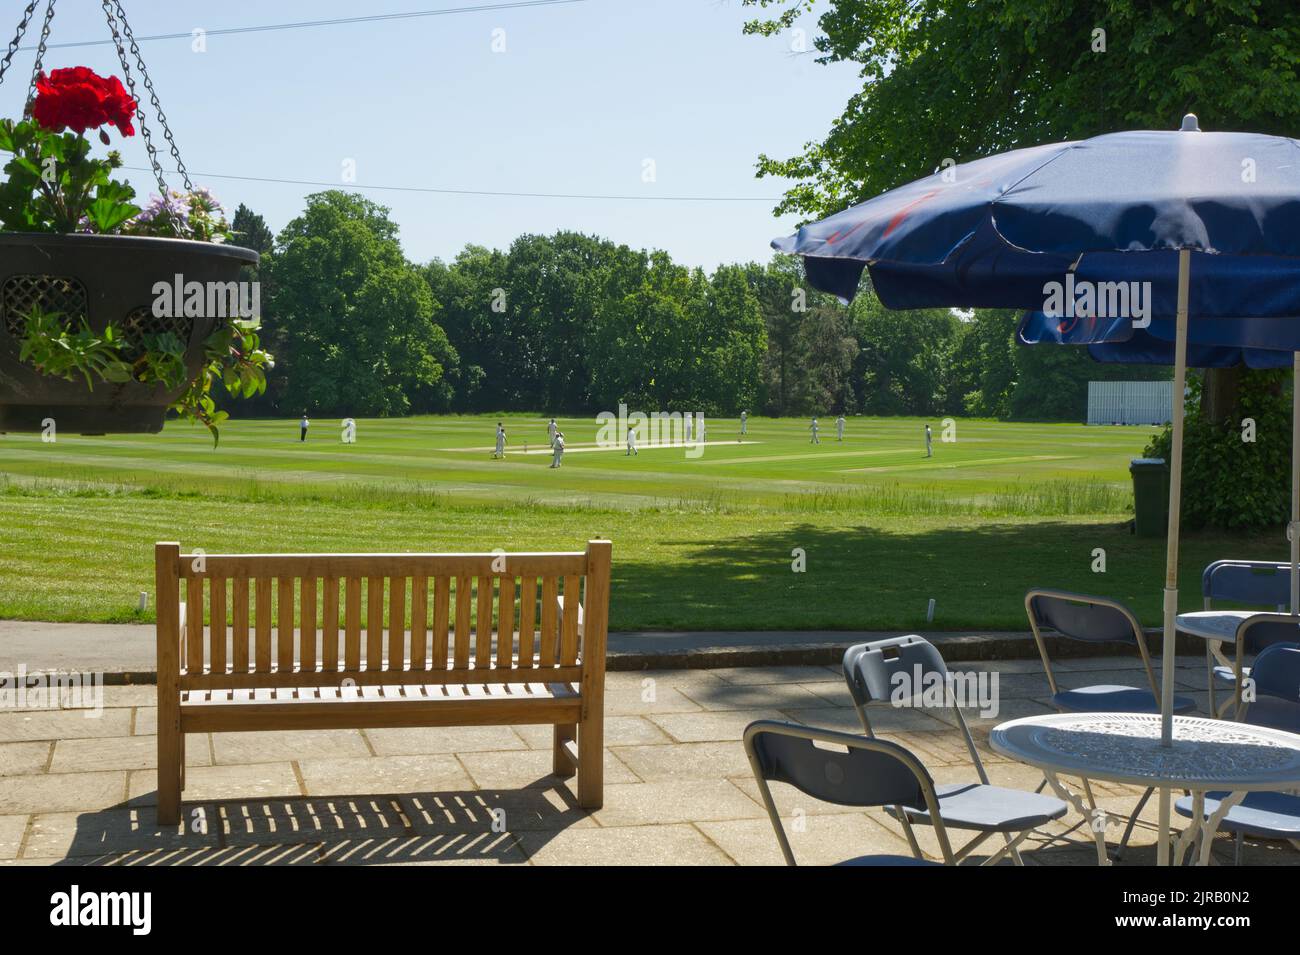 Cricket ground in rural setting with players on field and patio with bench and table and chairs. Unrecognisable people. Stock Photo